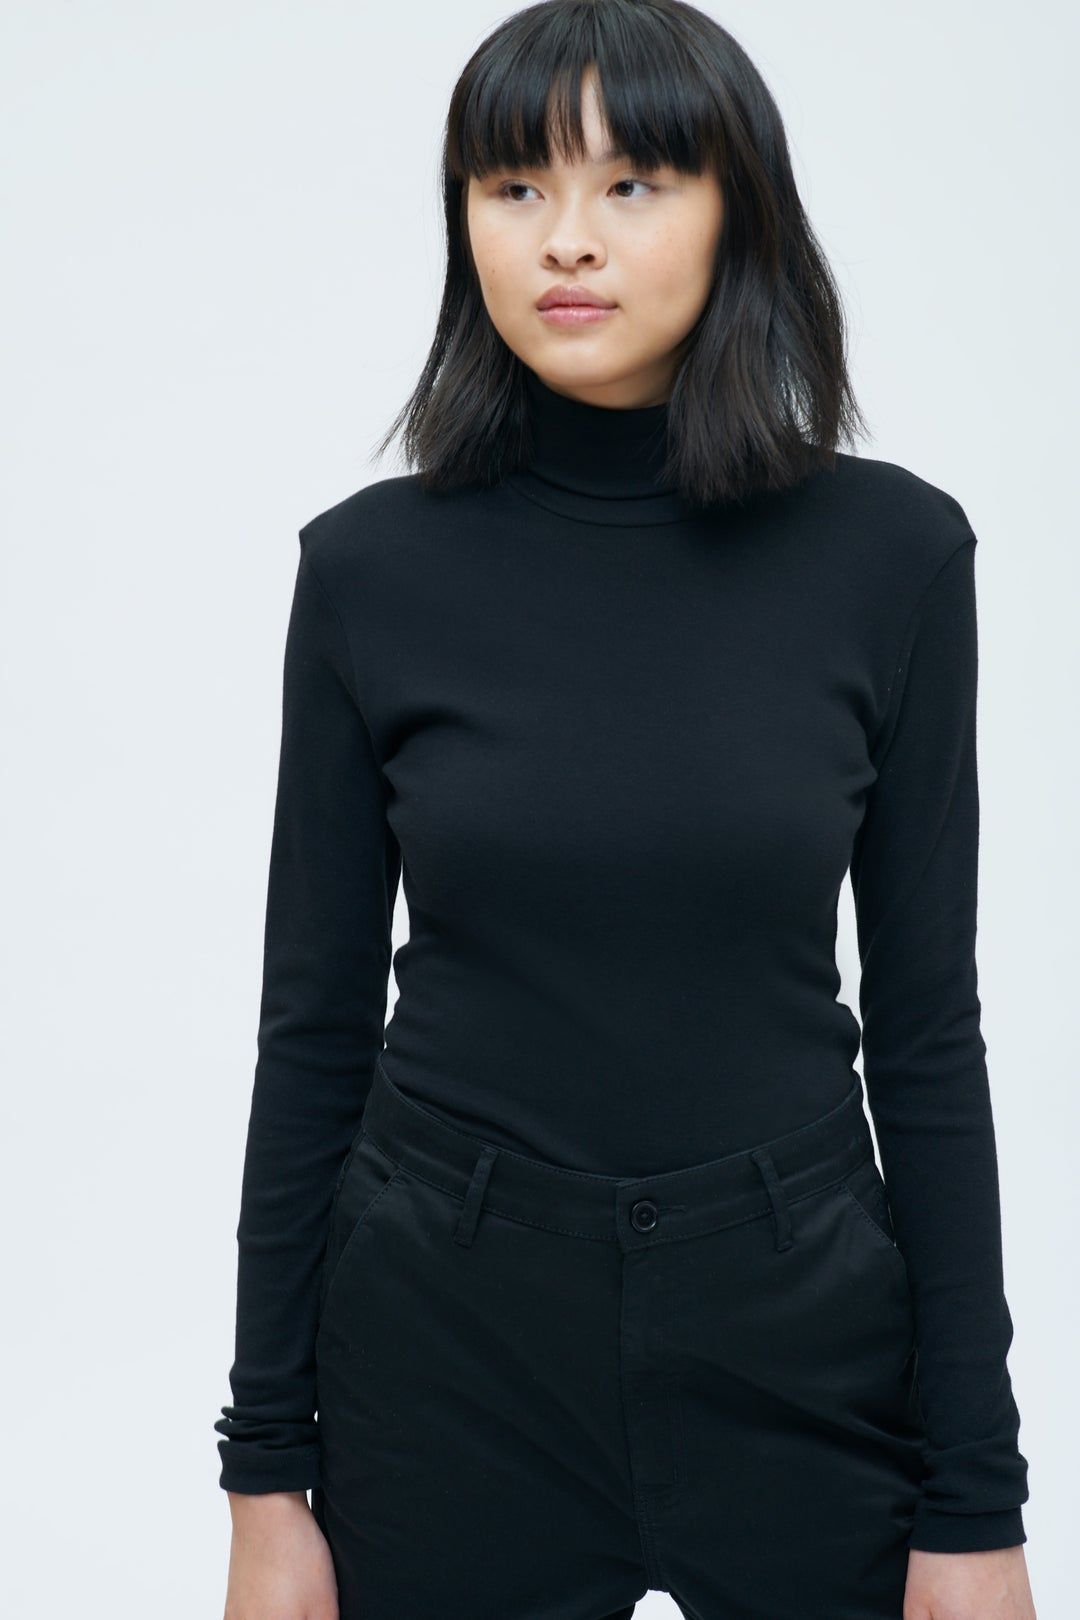 Turtleneck Black and White Shirt: The Must-Have Staple for Your Fall ...